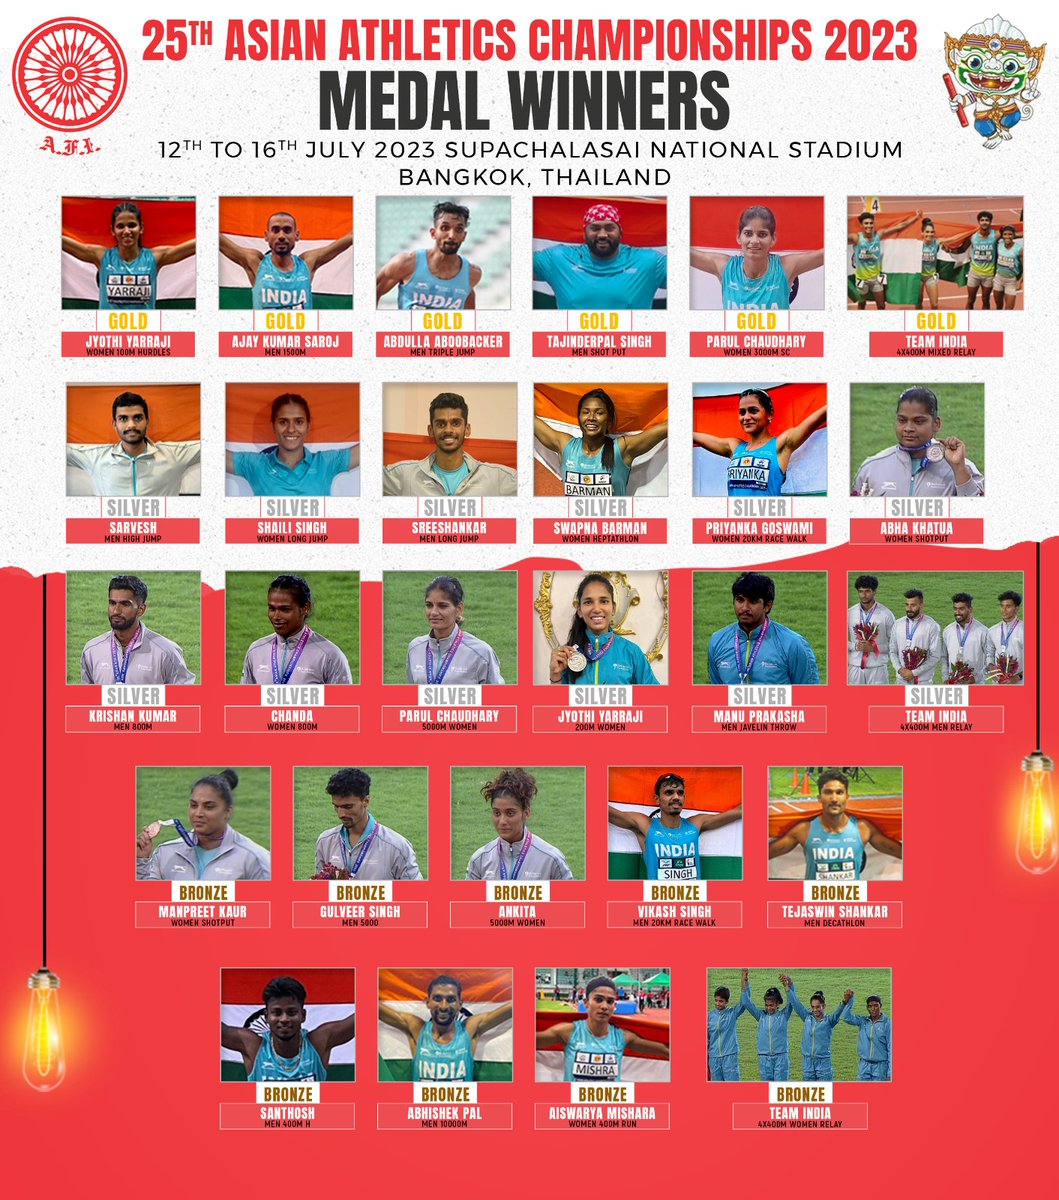 Medal winners of the 2023 Asian Athletics Championships held in Bangkok.